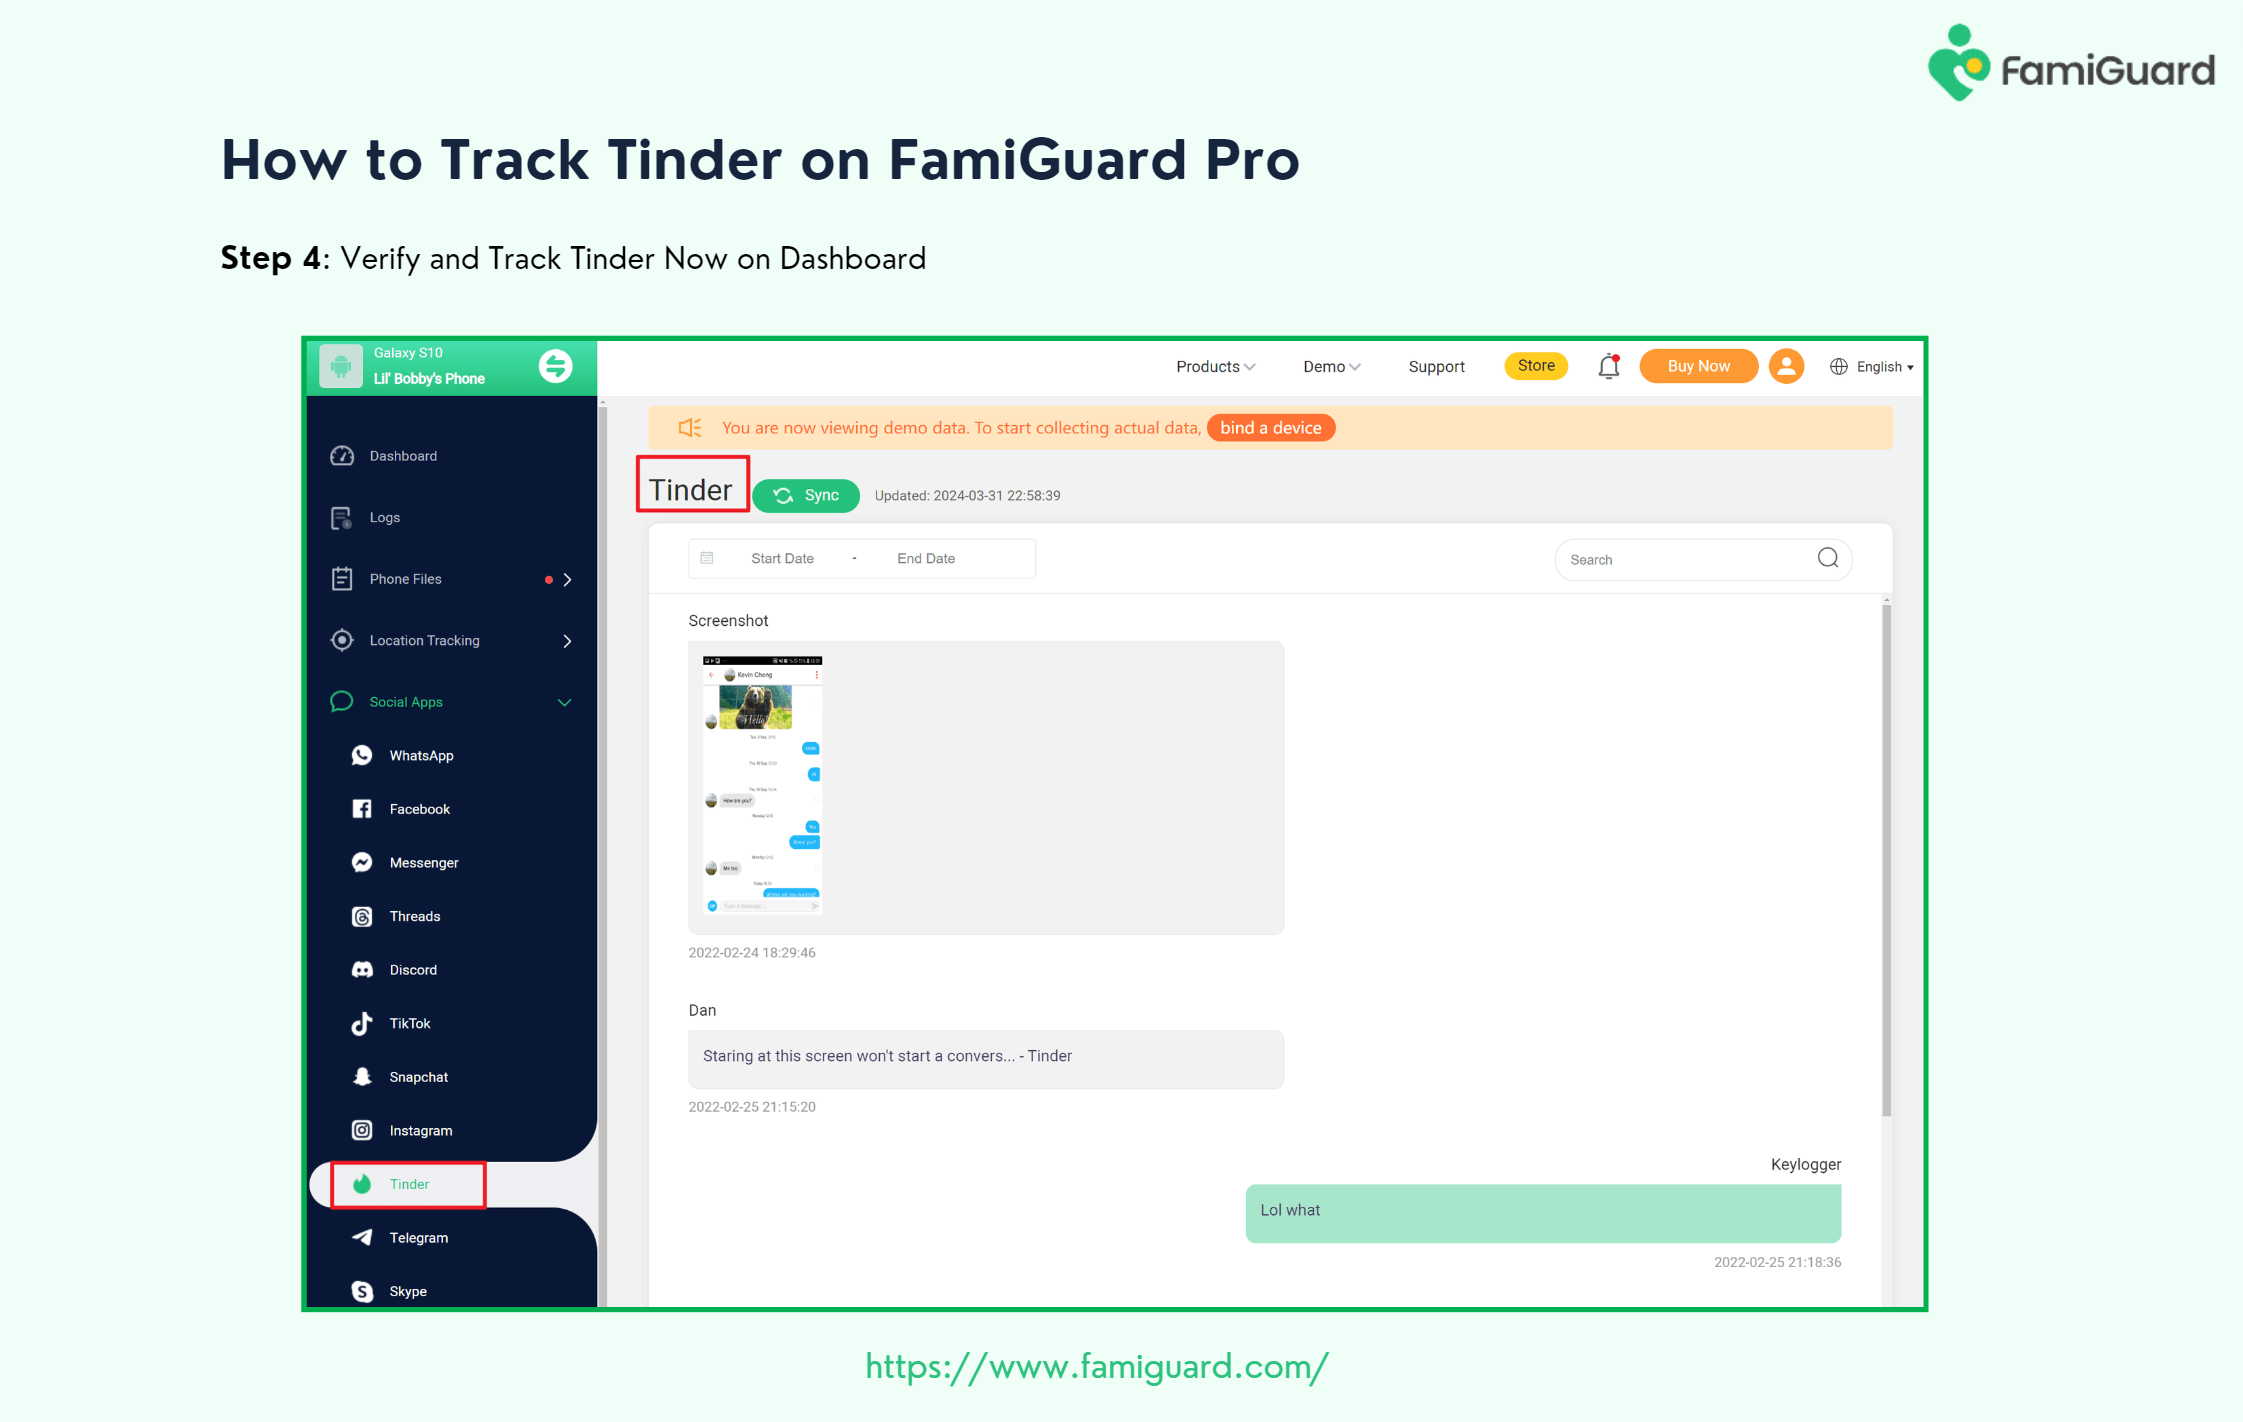 Verify and Track Tinder on FamiGuard Pro